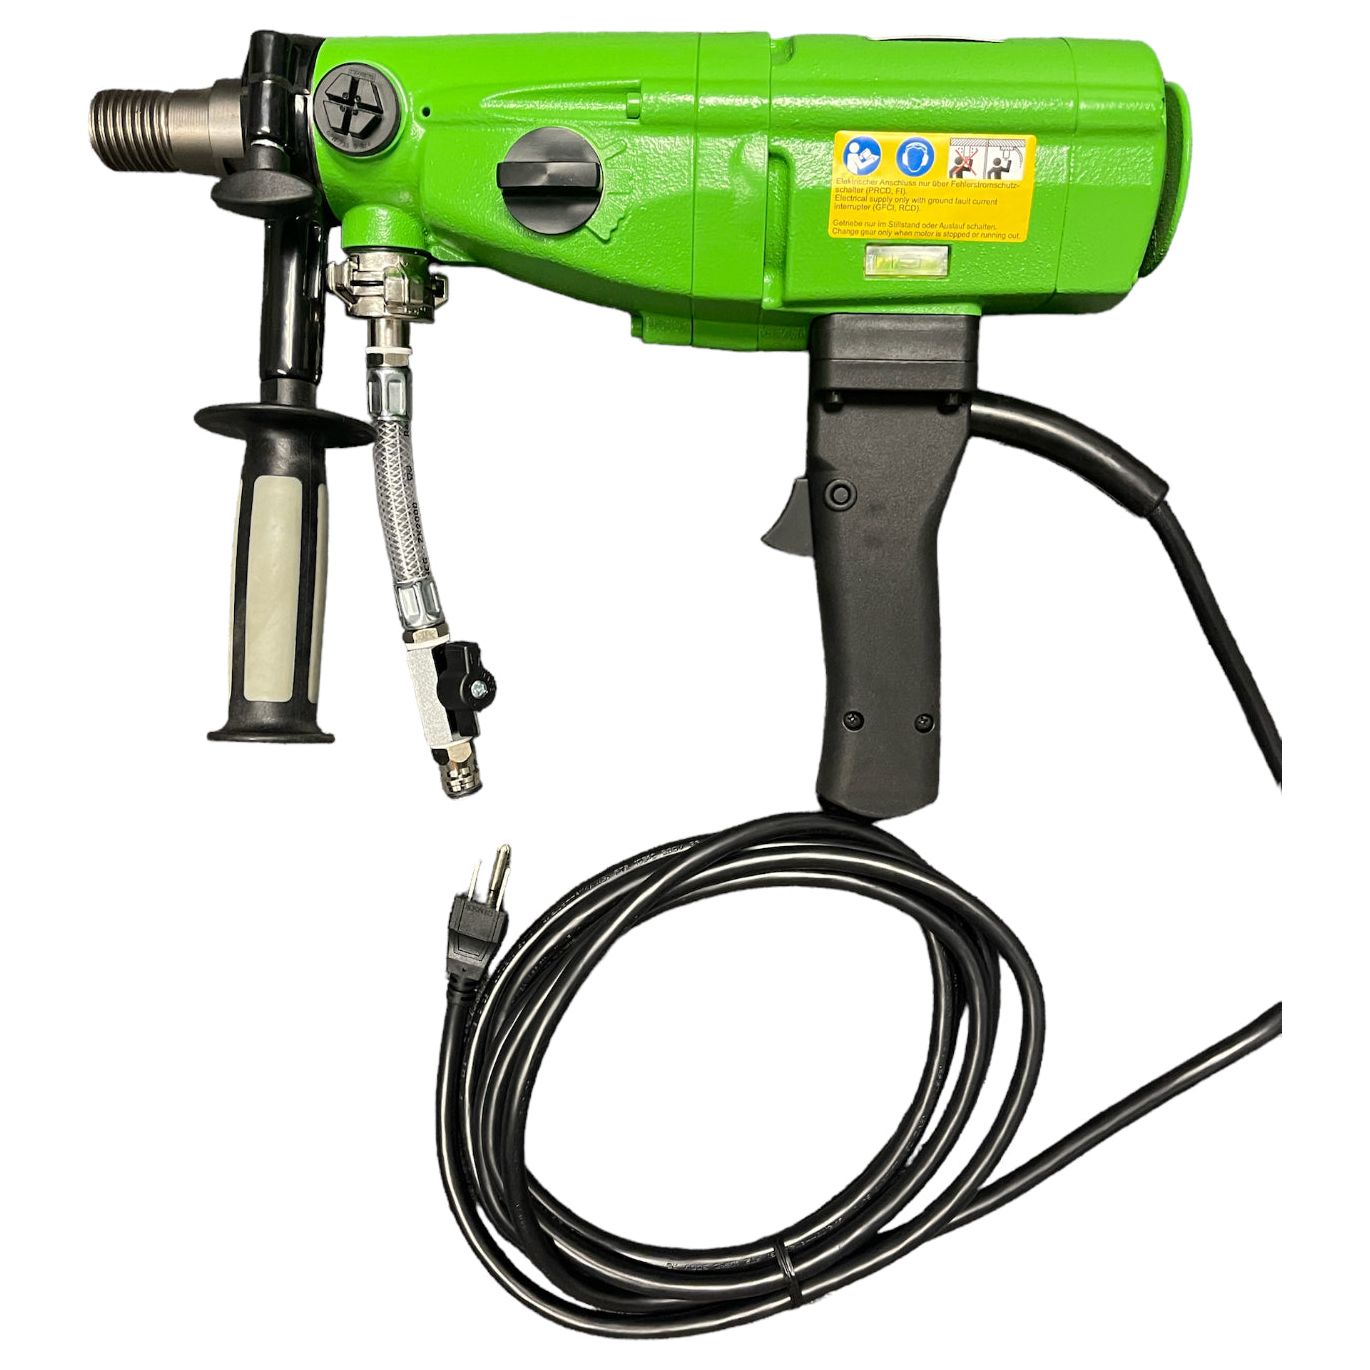 Weka DK13 Core Drill - Hand Held Core Drill - Dr. Schulze DDM160 Core Drill Motor -3 Speed - Wet / Dry Drilling -  115V 15A - DK16 Core Drill